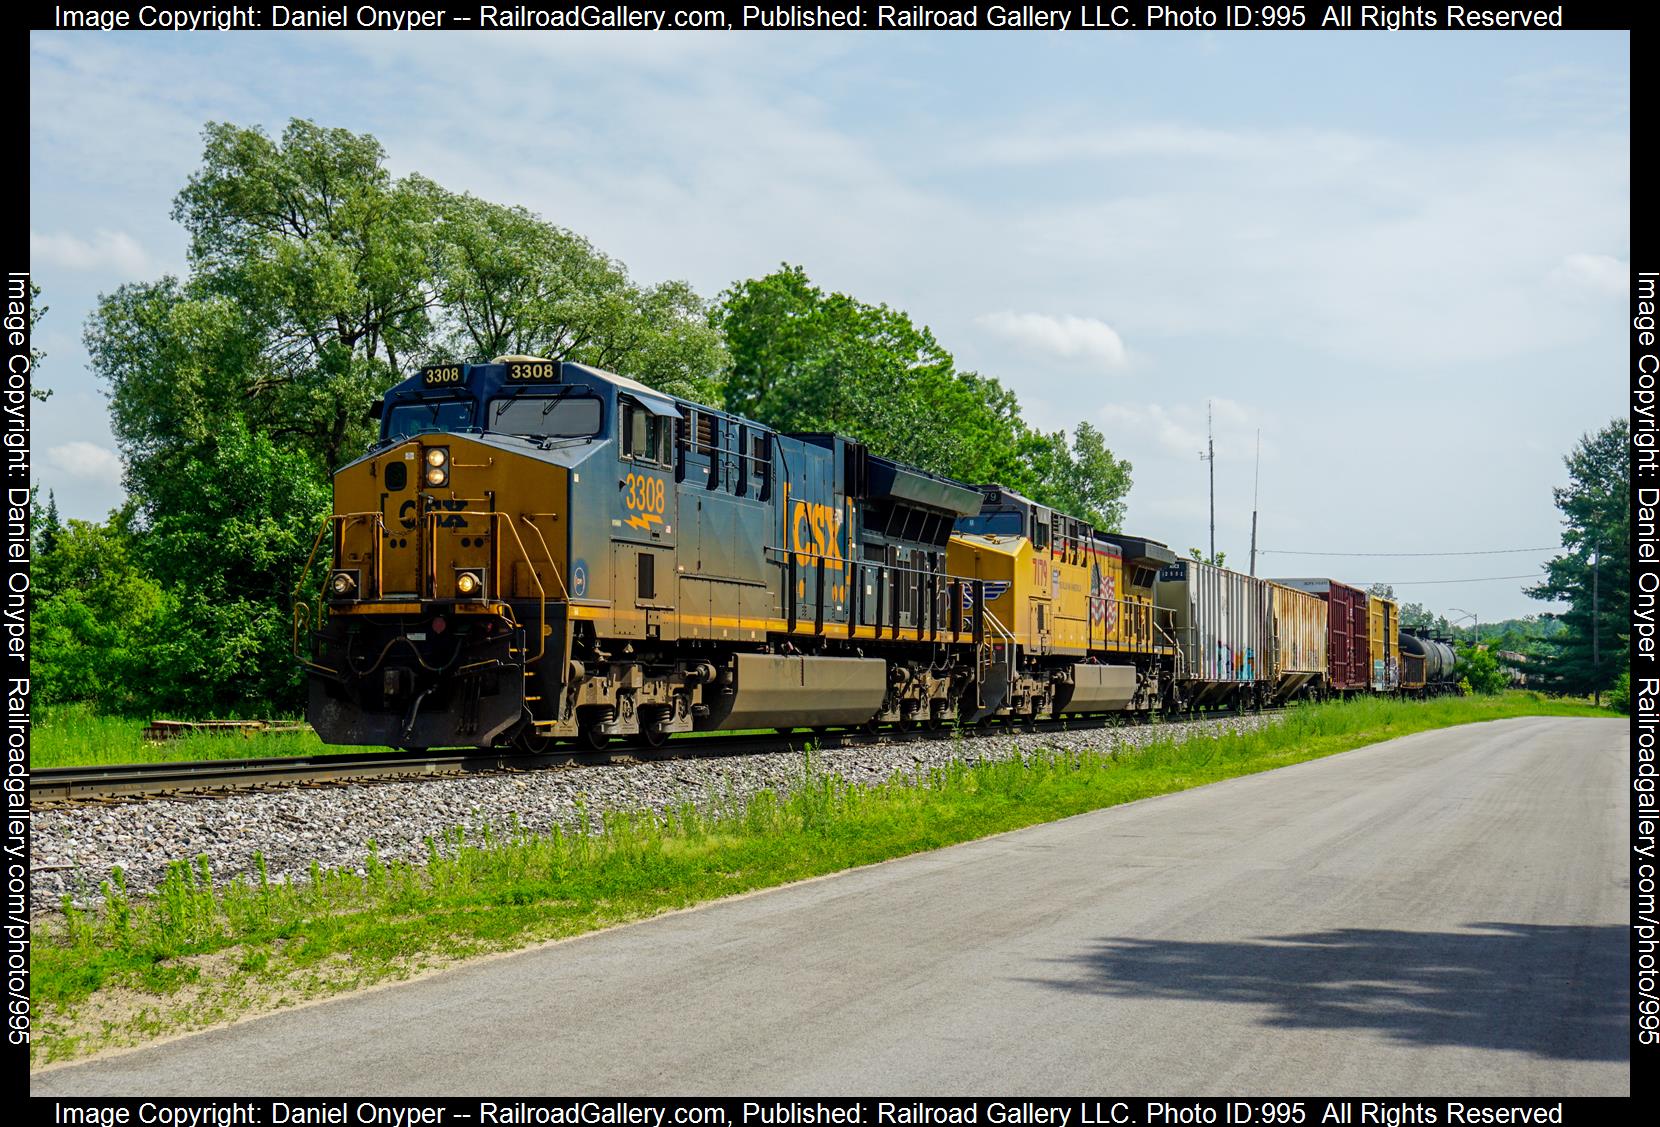 CSXT 3308 is a class GE ET44AH and  is pictured in Potsdam, New York, United States of America.  This was taken along the St. Lawrence Subdivision on the CSX Transportation. Photo Copyright: Daniel Onyper uploaded to Railroad Gallery on 04/24/2023. This photograph of CSXT 3308 was taken on Thursday, June 16, 2022. All Rights Reserved. 